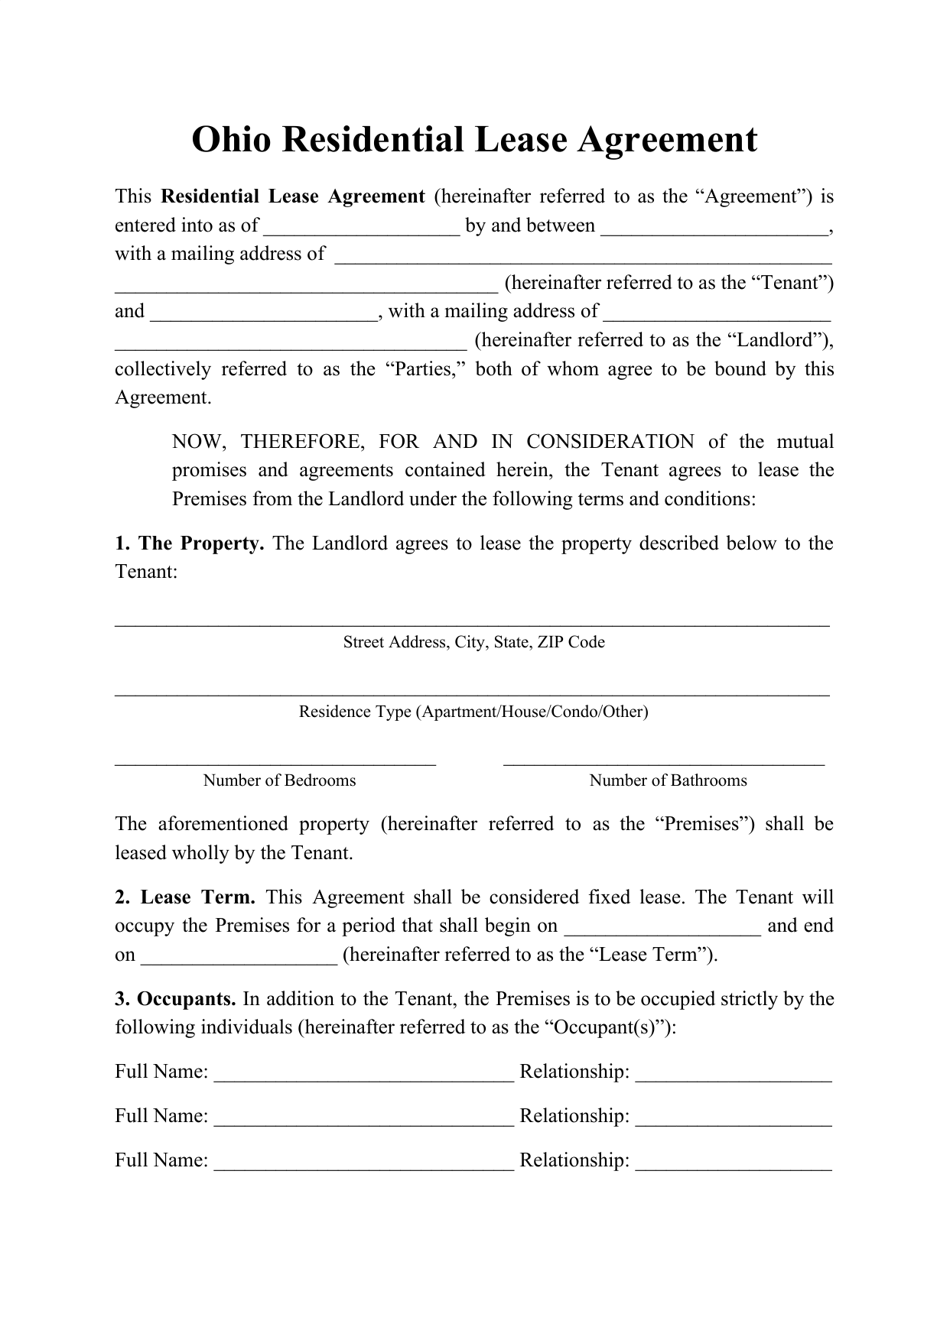 Residential Lease Agreement Template - Ohio, Page 1